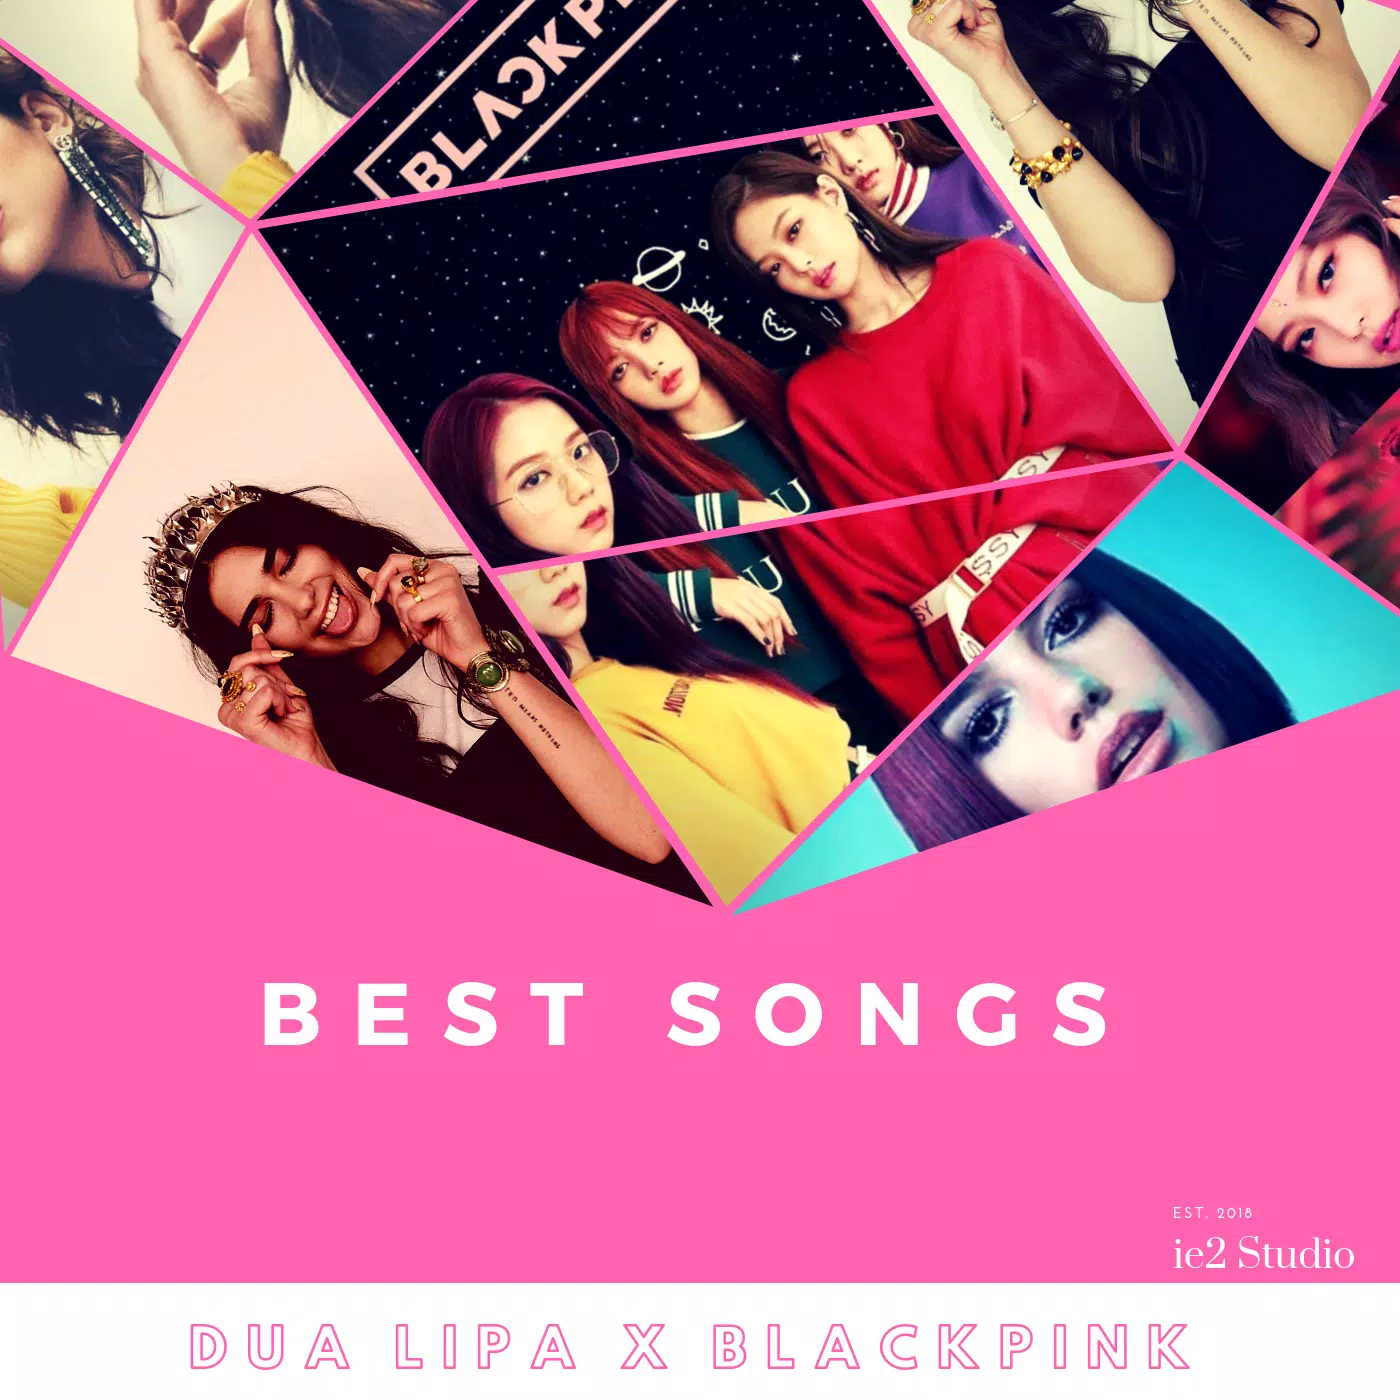 BLACKPINK feat DUA LIPA - Kiss and Make Up APK for Android Download